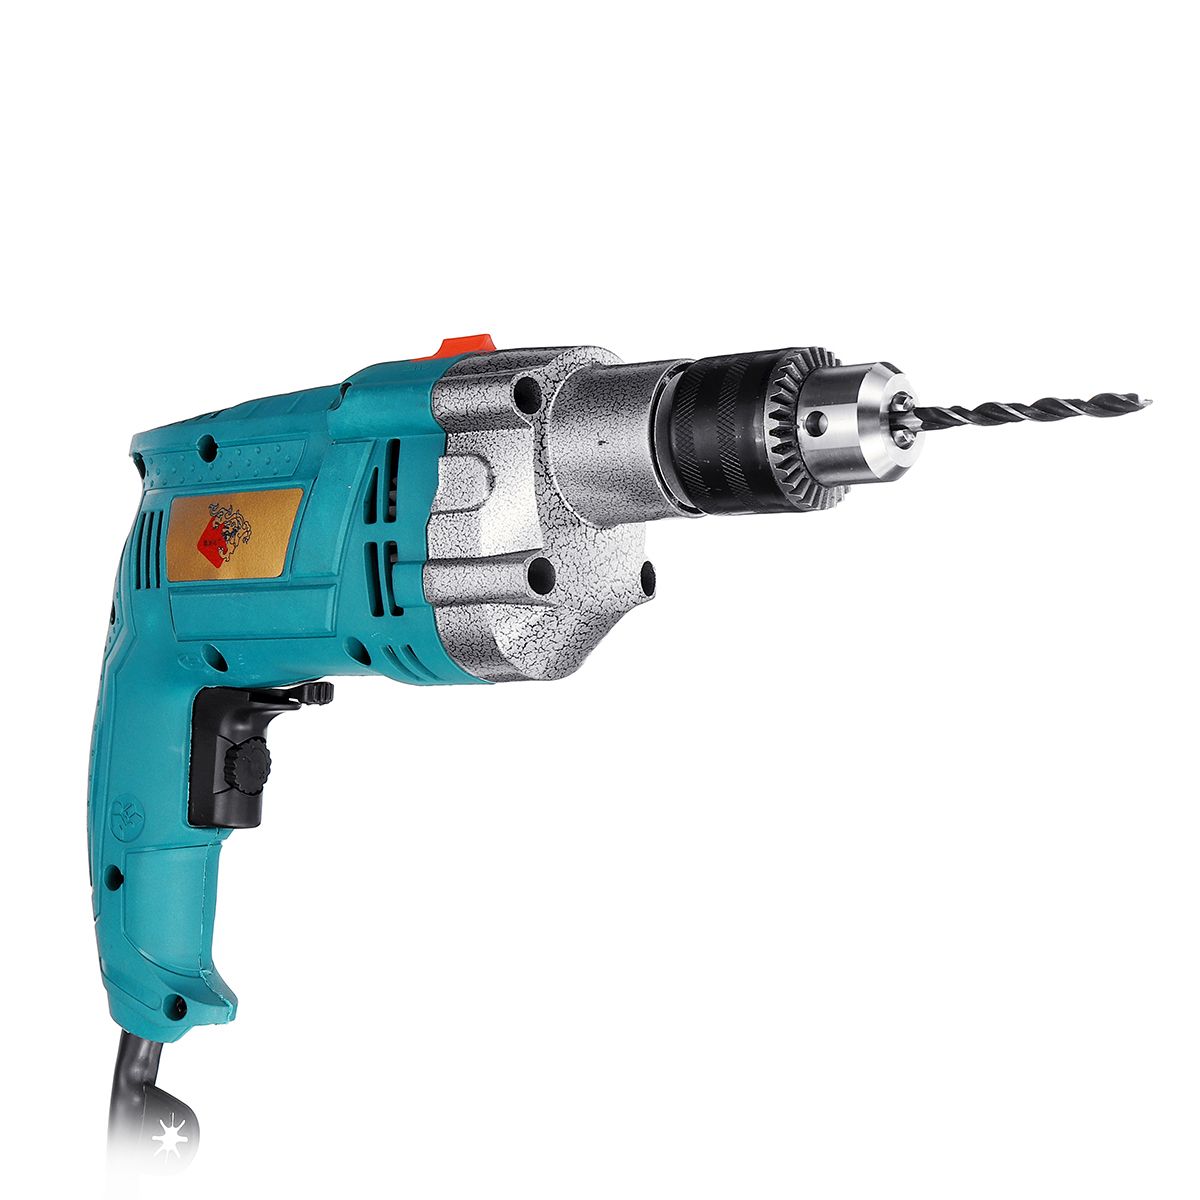 32Pcs-Set-1980W-3800RPM-Electric-Impact-Drill-Screwdriver-Household-Electric-Flat-Drill-Grinding-1466059